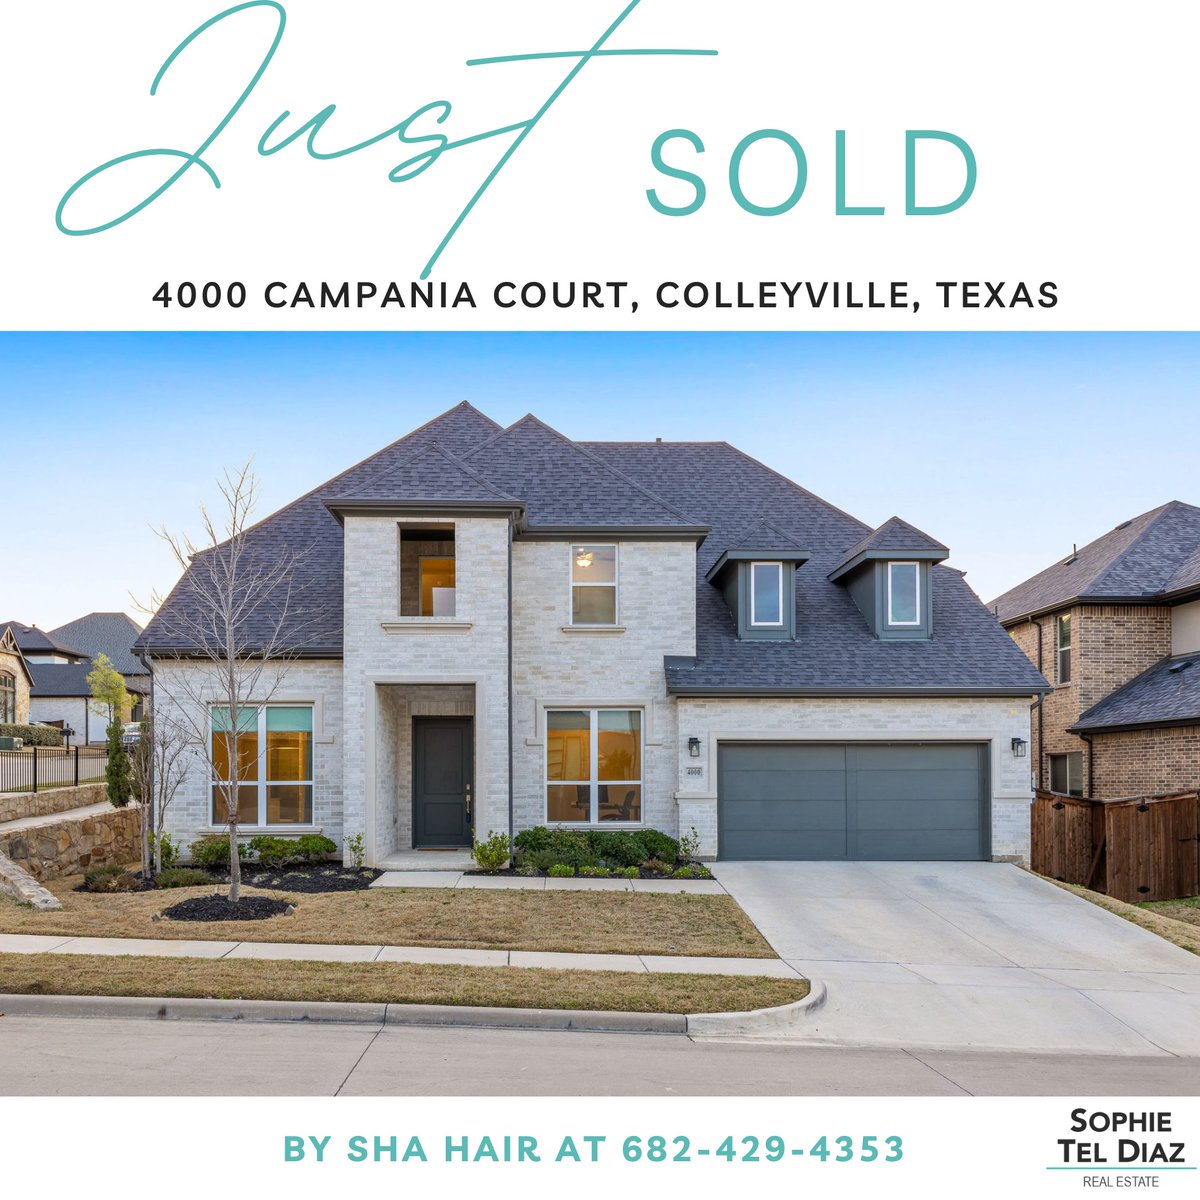 Just Sold by Sha!🎉
📍4000 Campania Court, Colleyville, Texas
Call or Text me if you are interested in selling your home 
📲682-429-4353

#justsold  #justsoldit #luxuryhome #milliondollarlisting #dfwrealestate #texasrealestate #shahairrealtor #shasellsrealestate #colleyvilletx